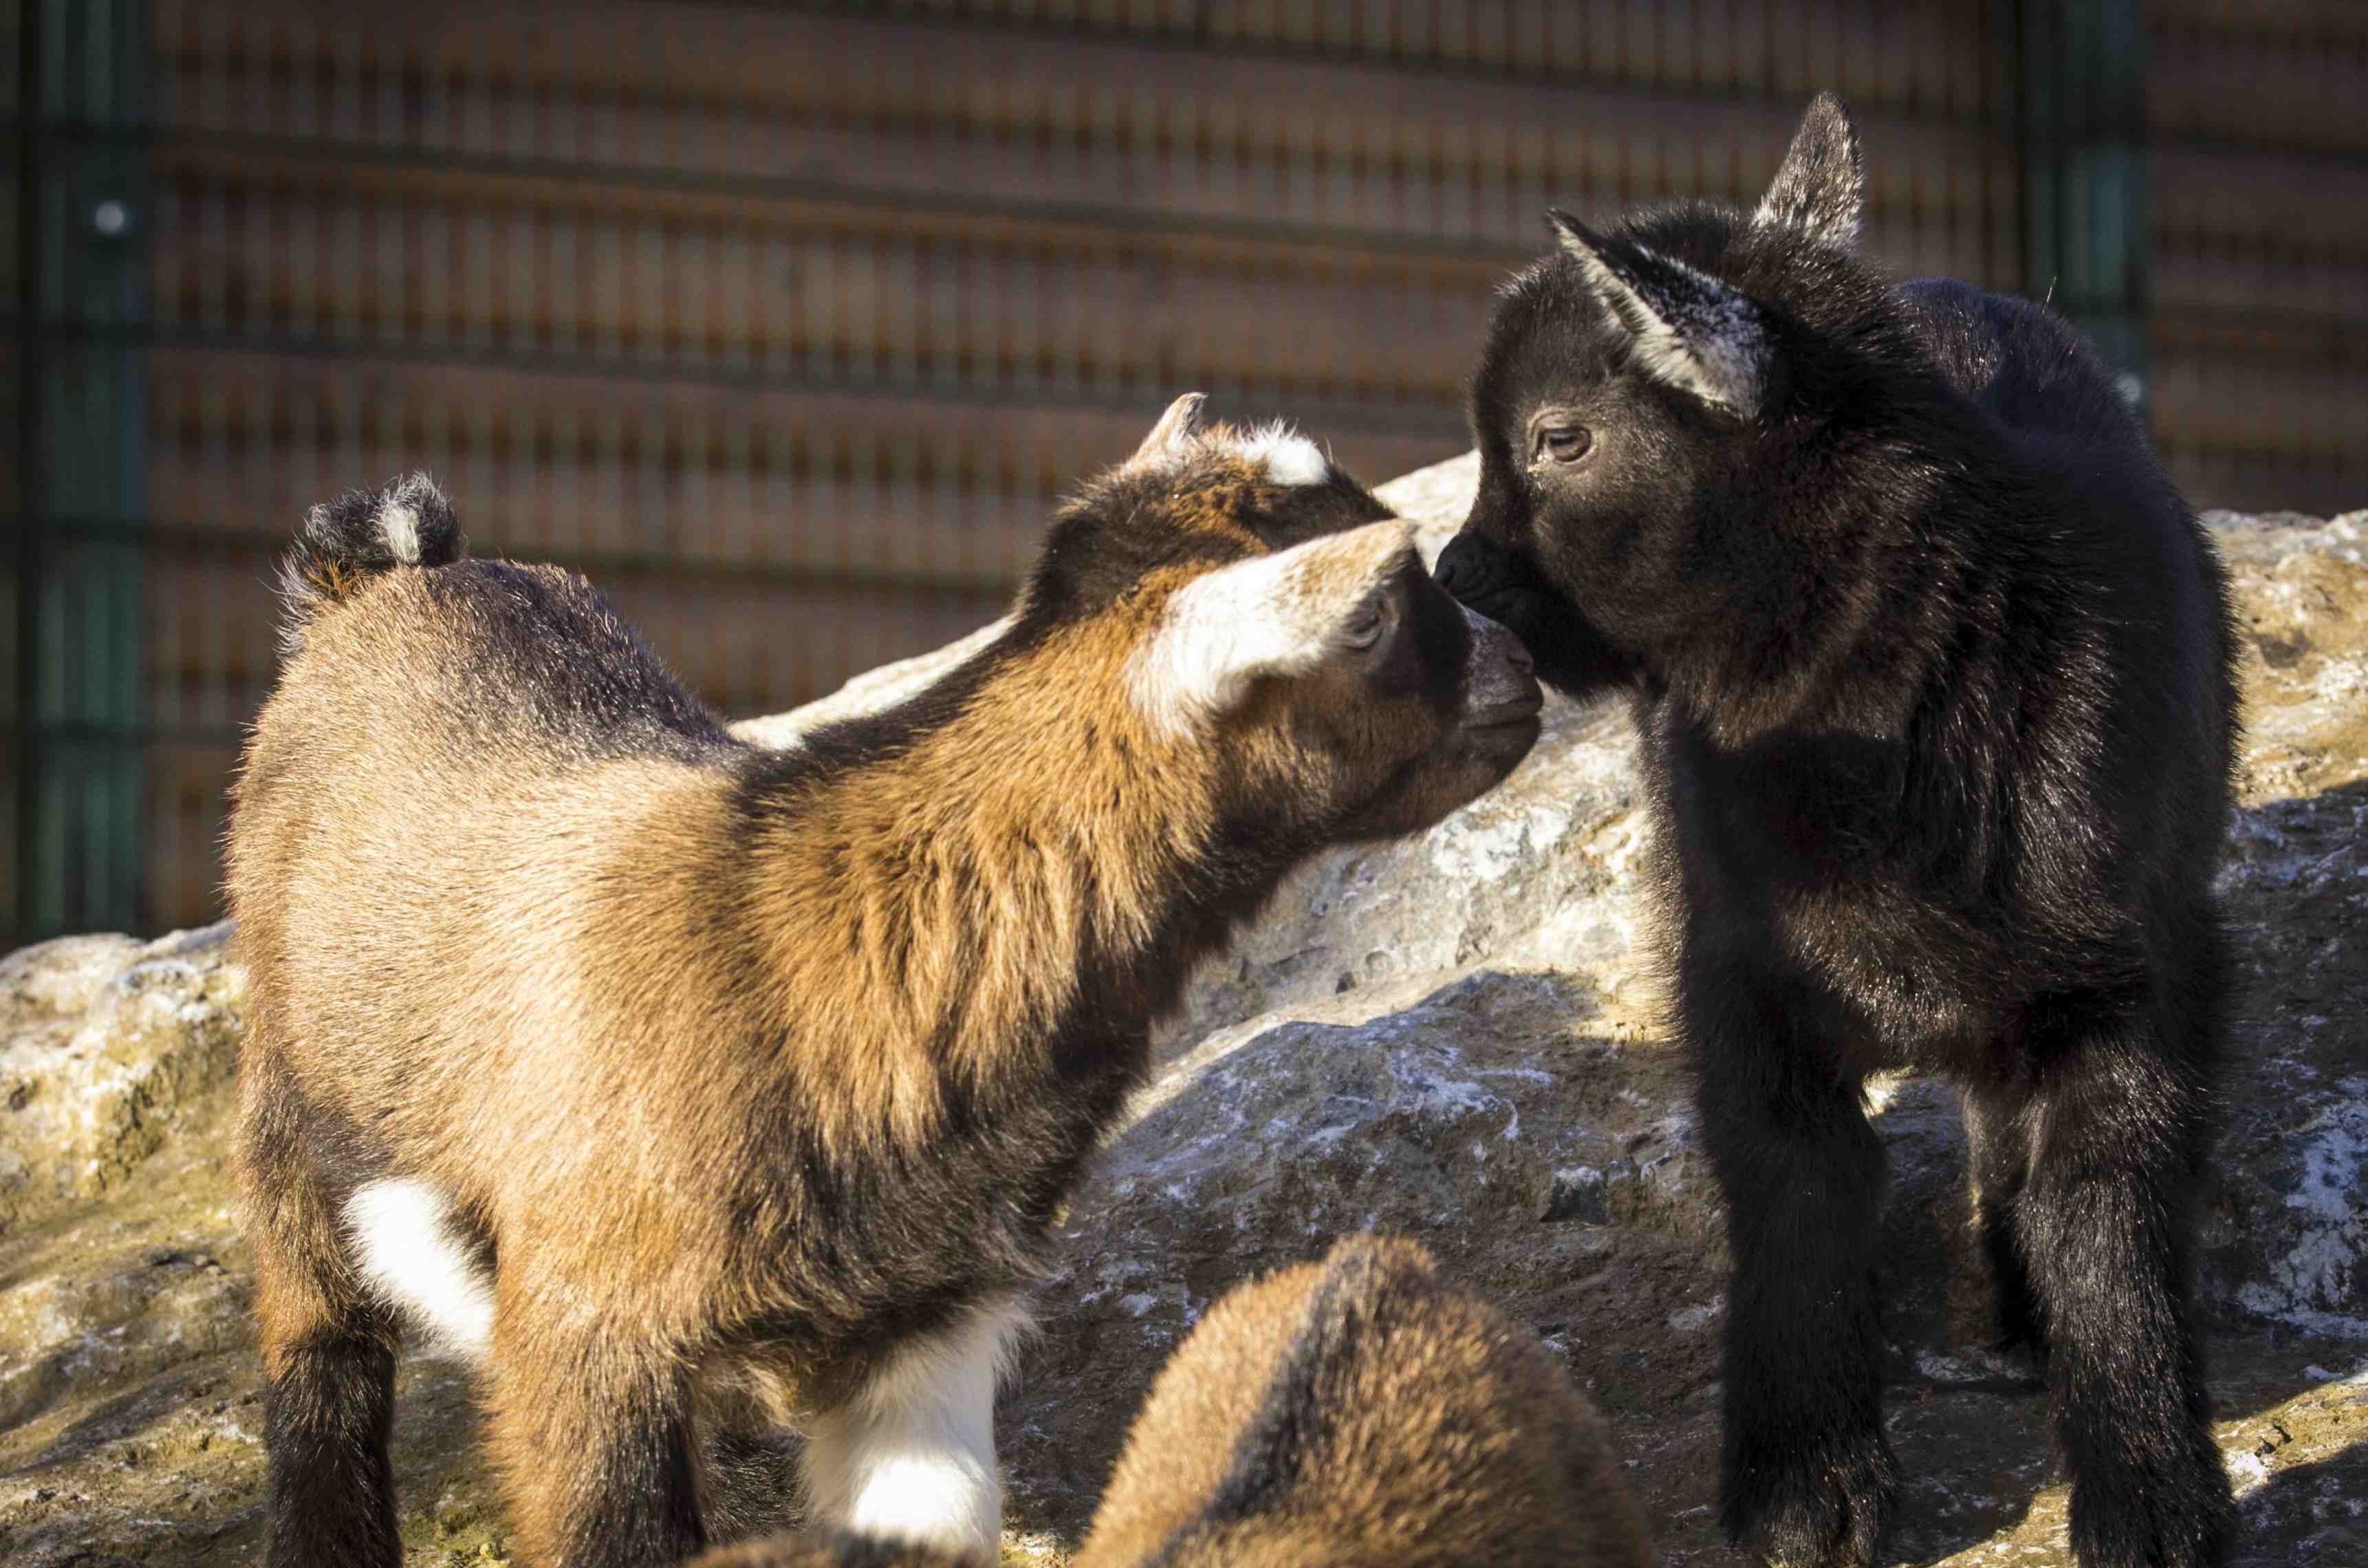 Two baby African pygmy goat rubbing noses while standing on rocks